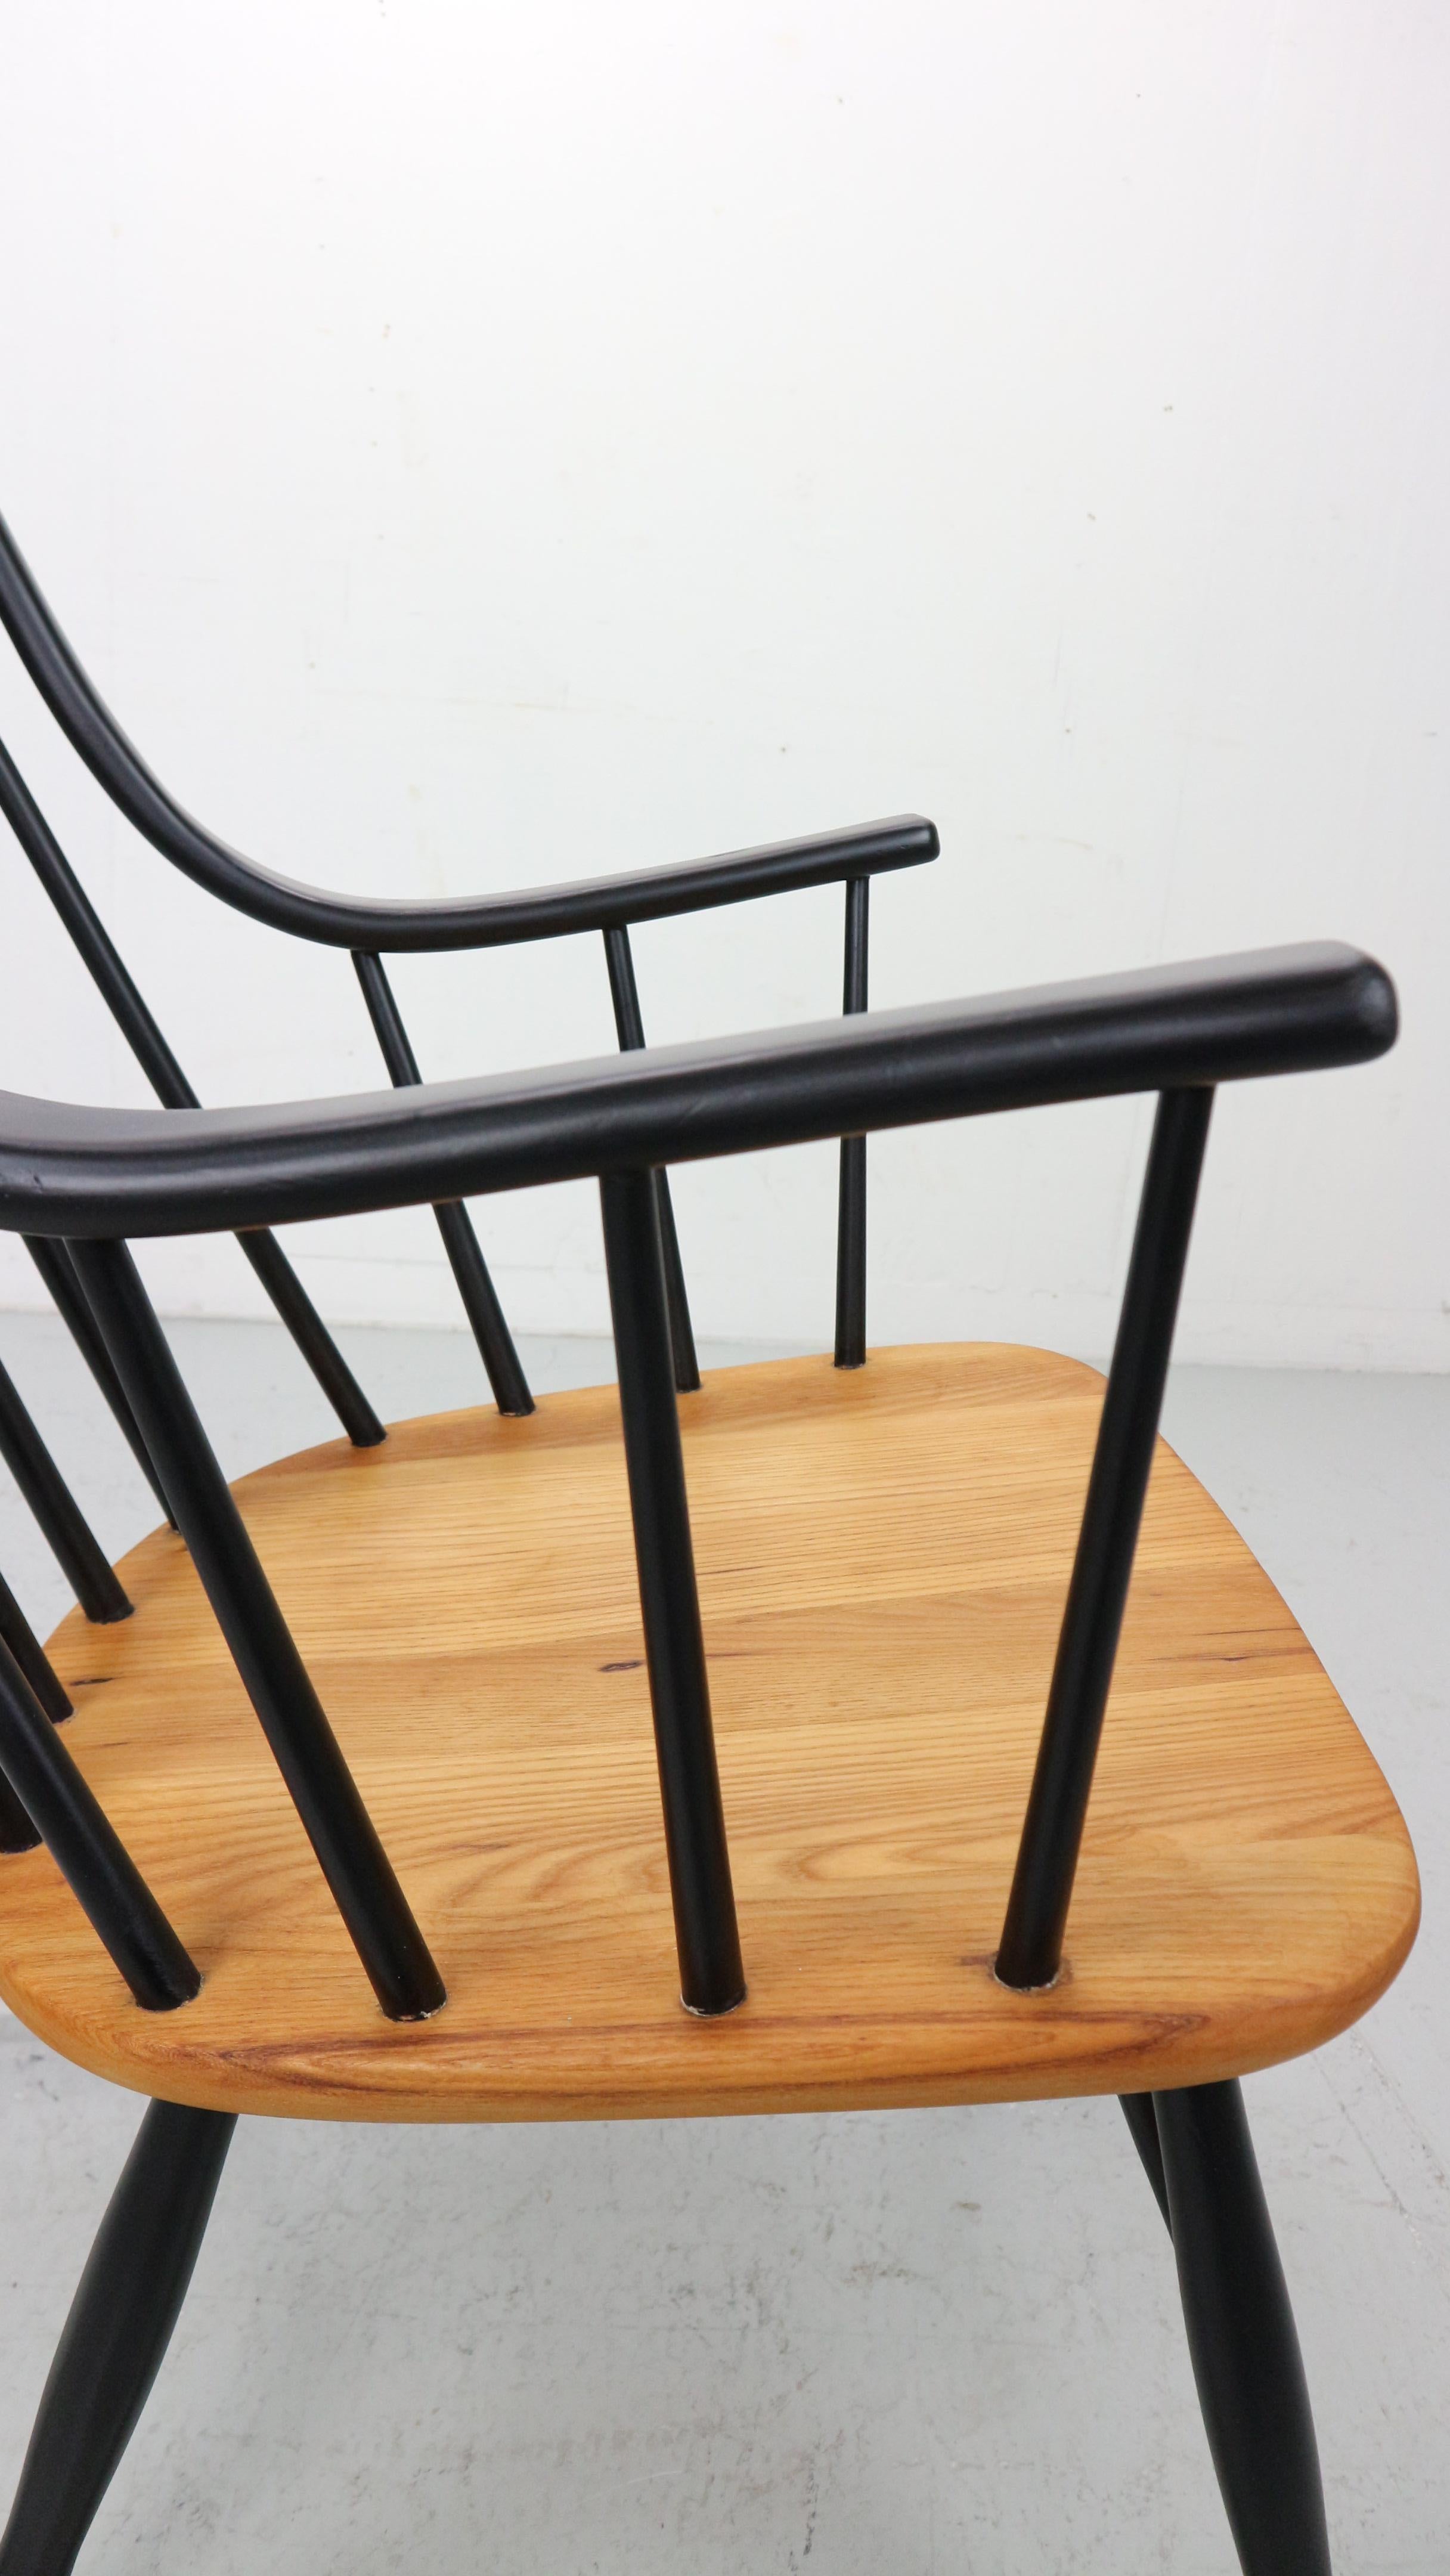 Lena Larsson, made by Nesto, a mid century rockingchair with sculptural arms 2